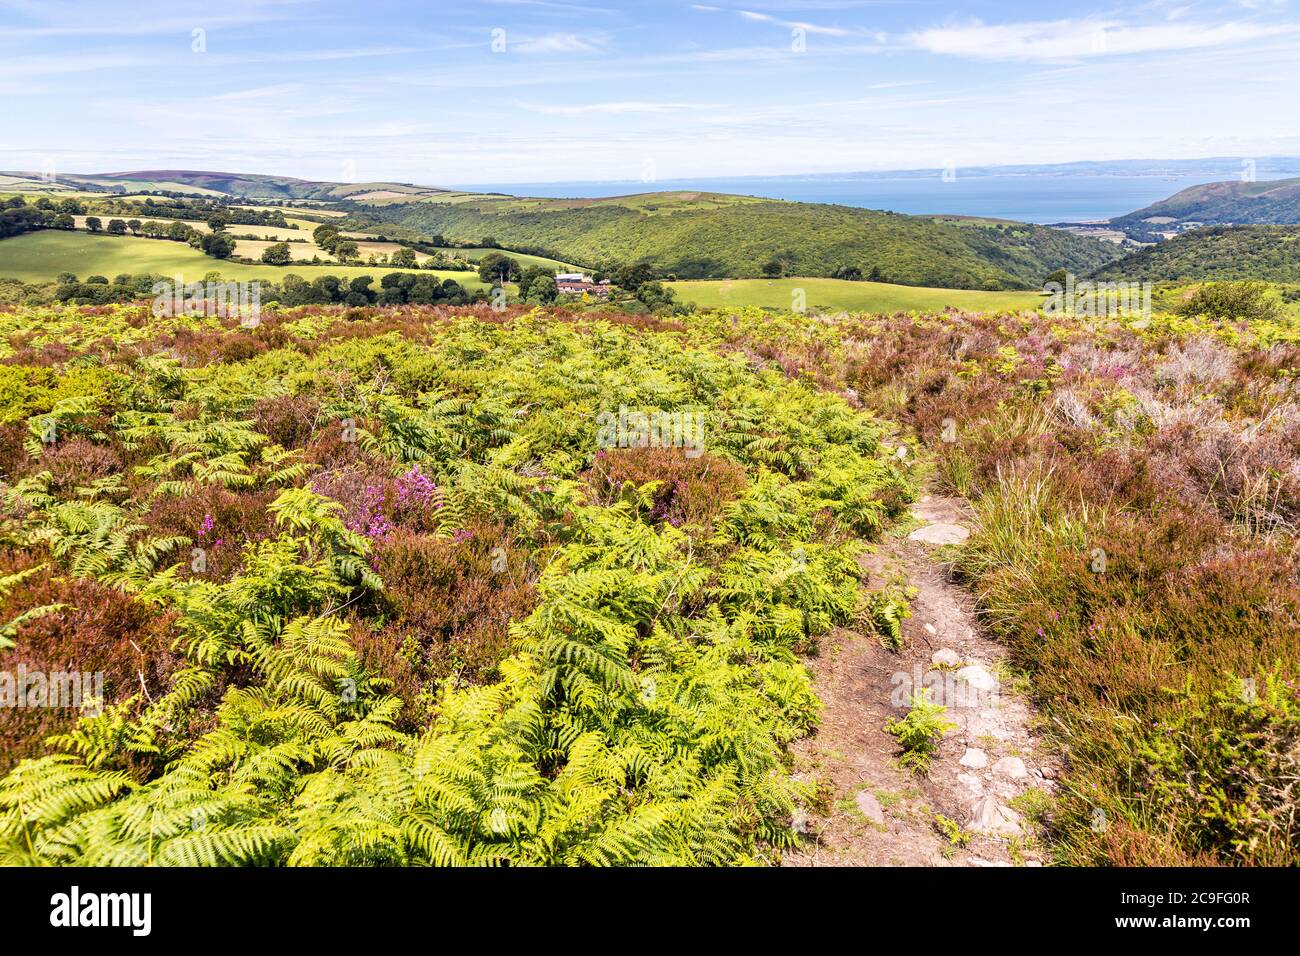 Exmoor National Park - The view towards Cloutsham and Bossington from the path on Dunkery Hill leading to Dunkery Beacon, Somerset UK Stock Photo